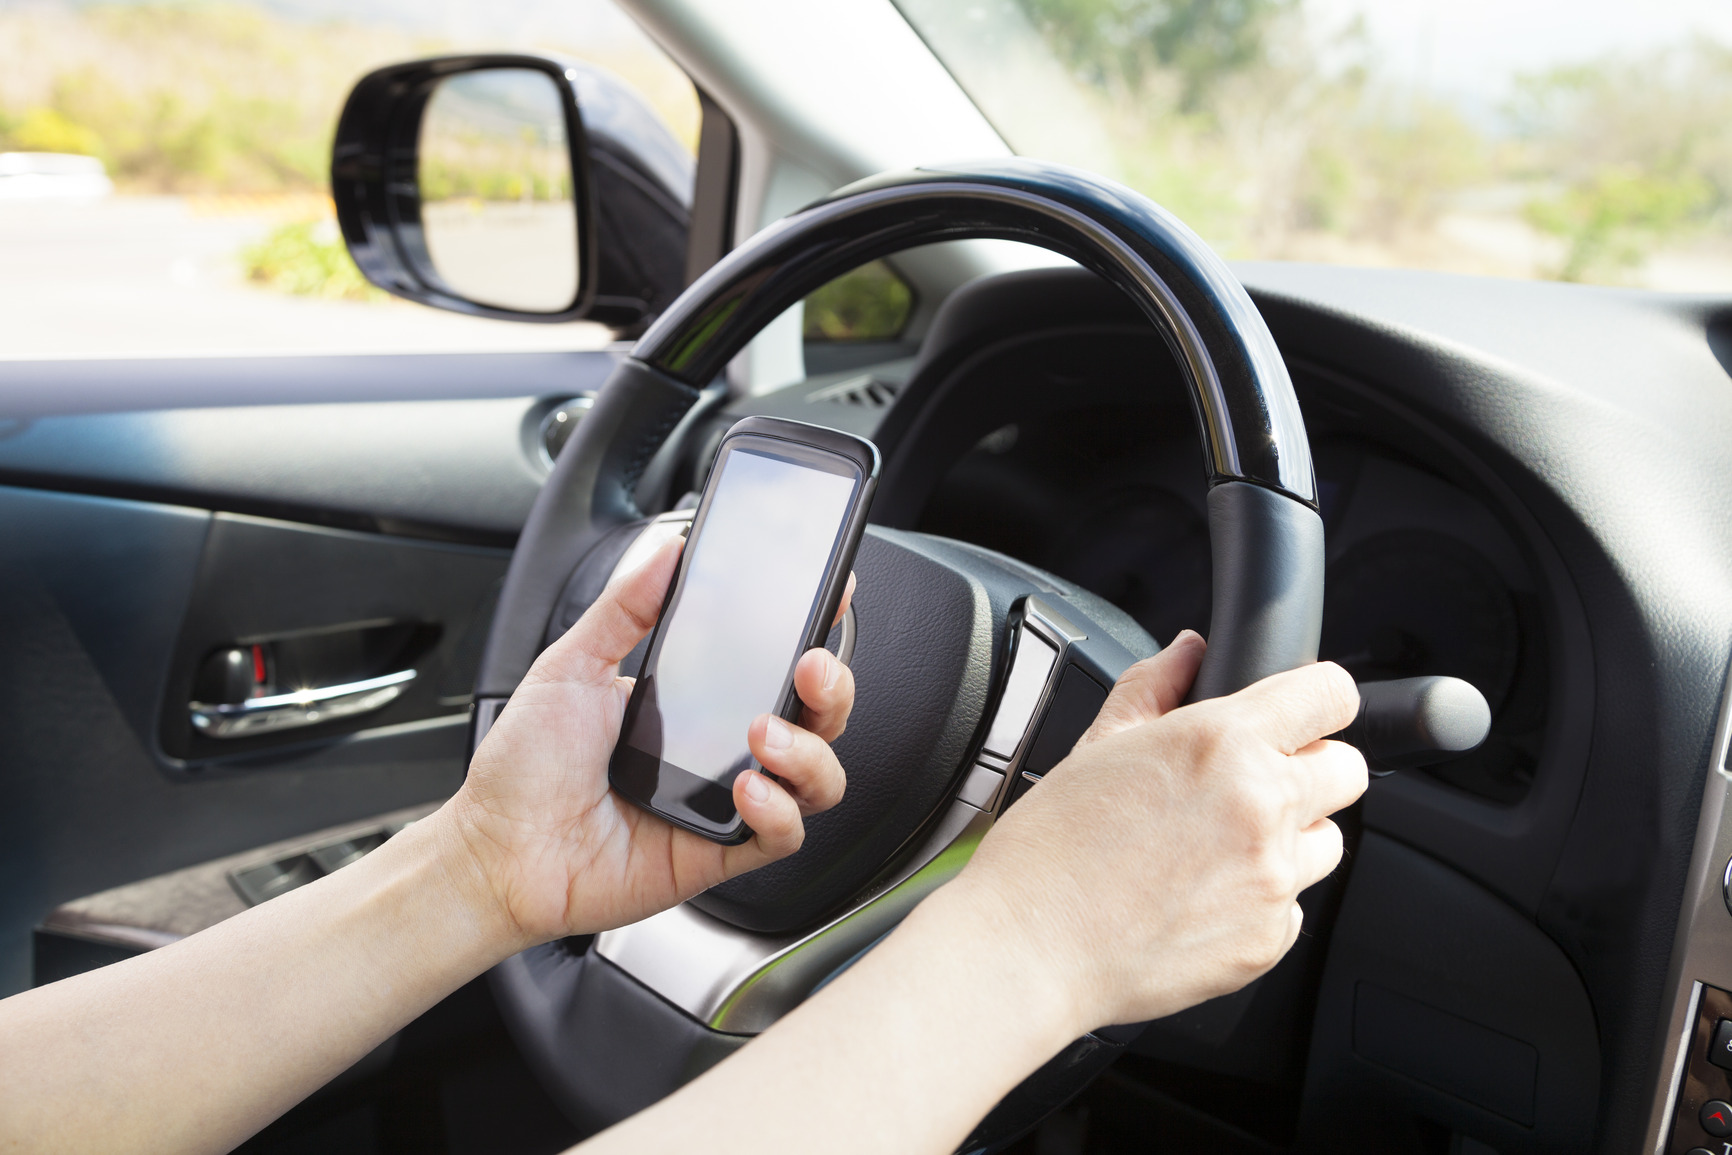 Why You Need To Talk To Your Kids About Distracted Driving